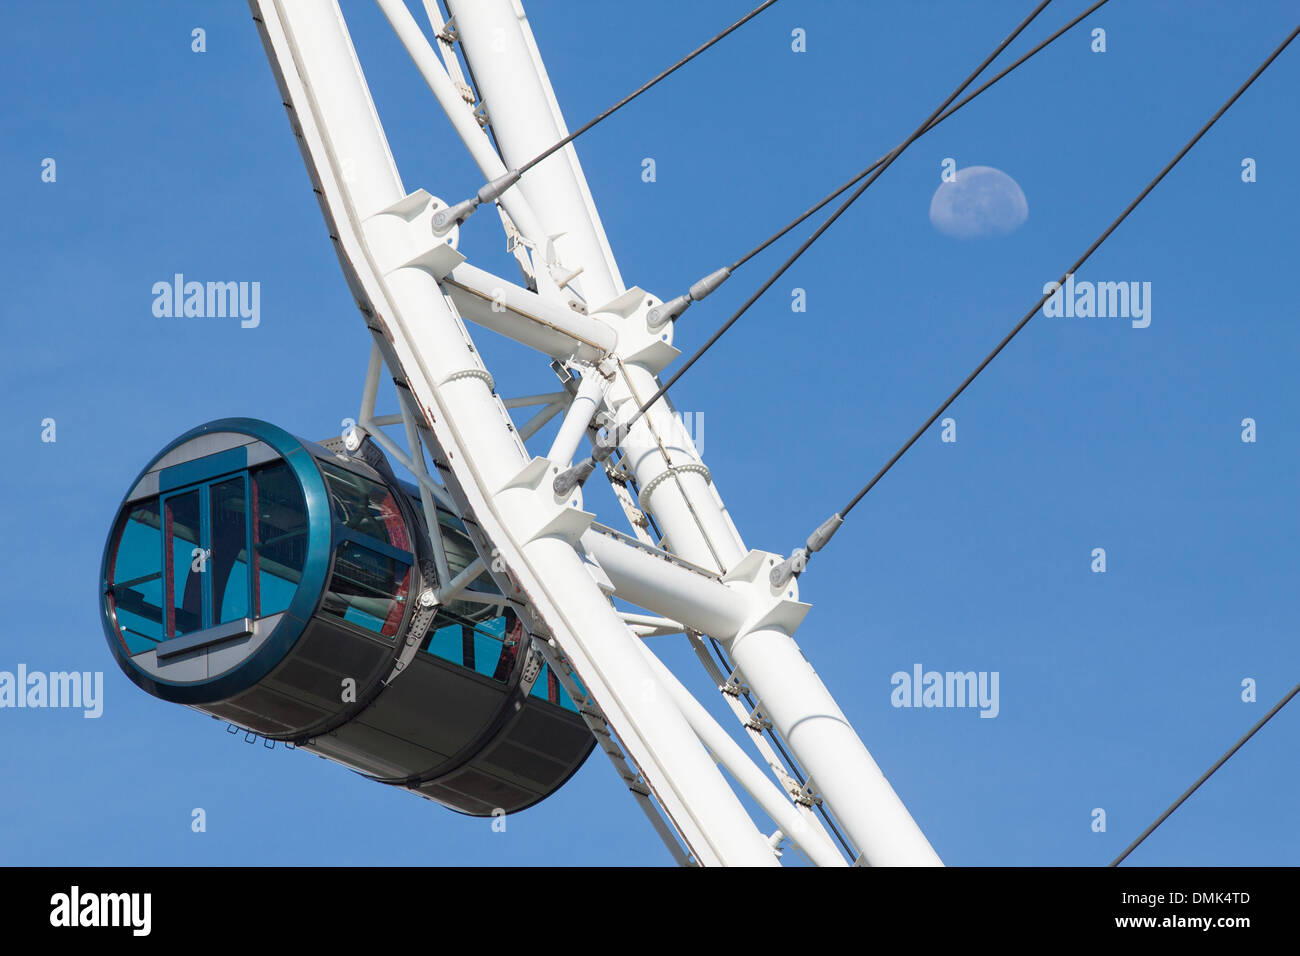 FACE TO FACE, THE MOON AND ONE OF THE CARRIAGES ON THE FERRIS WHEEL SINGAPORE FLYER, MARINA BAY, SINGAPORE Stock Photo